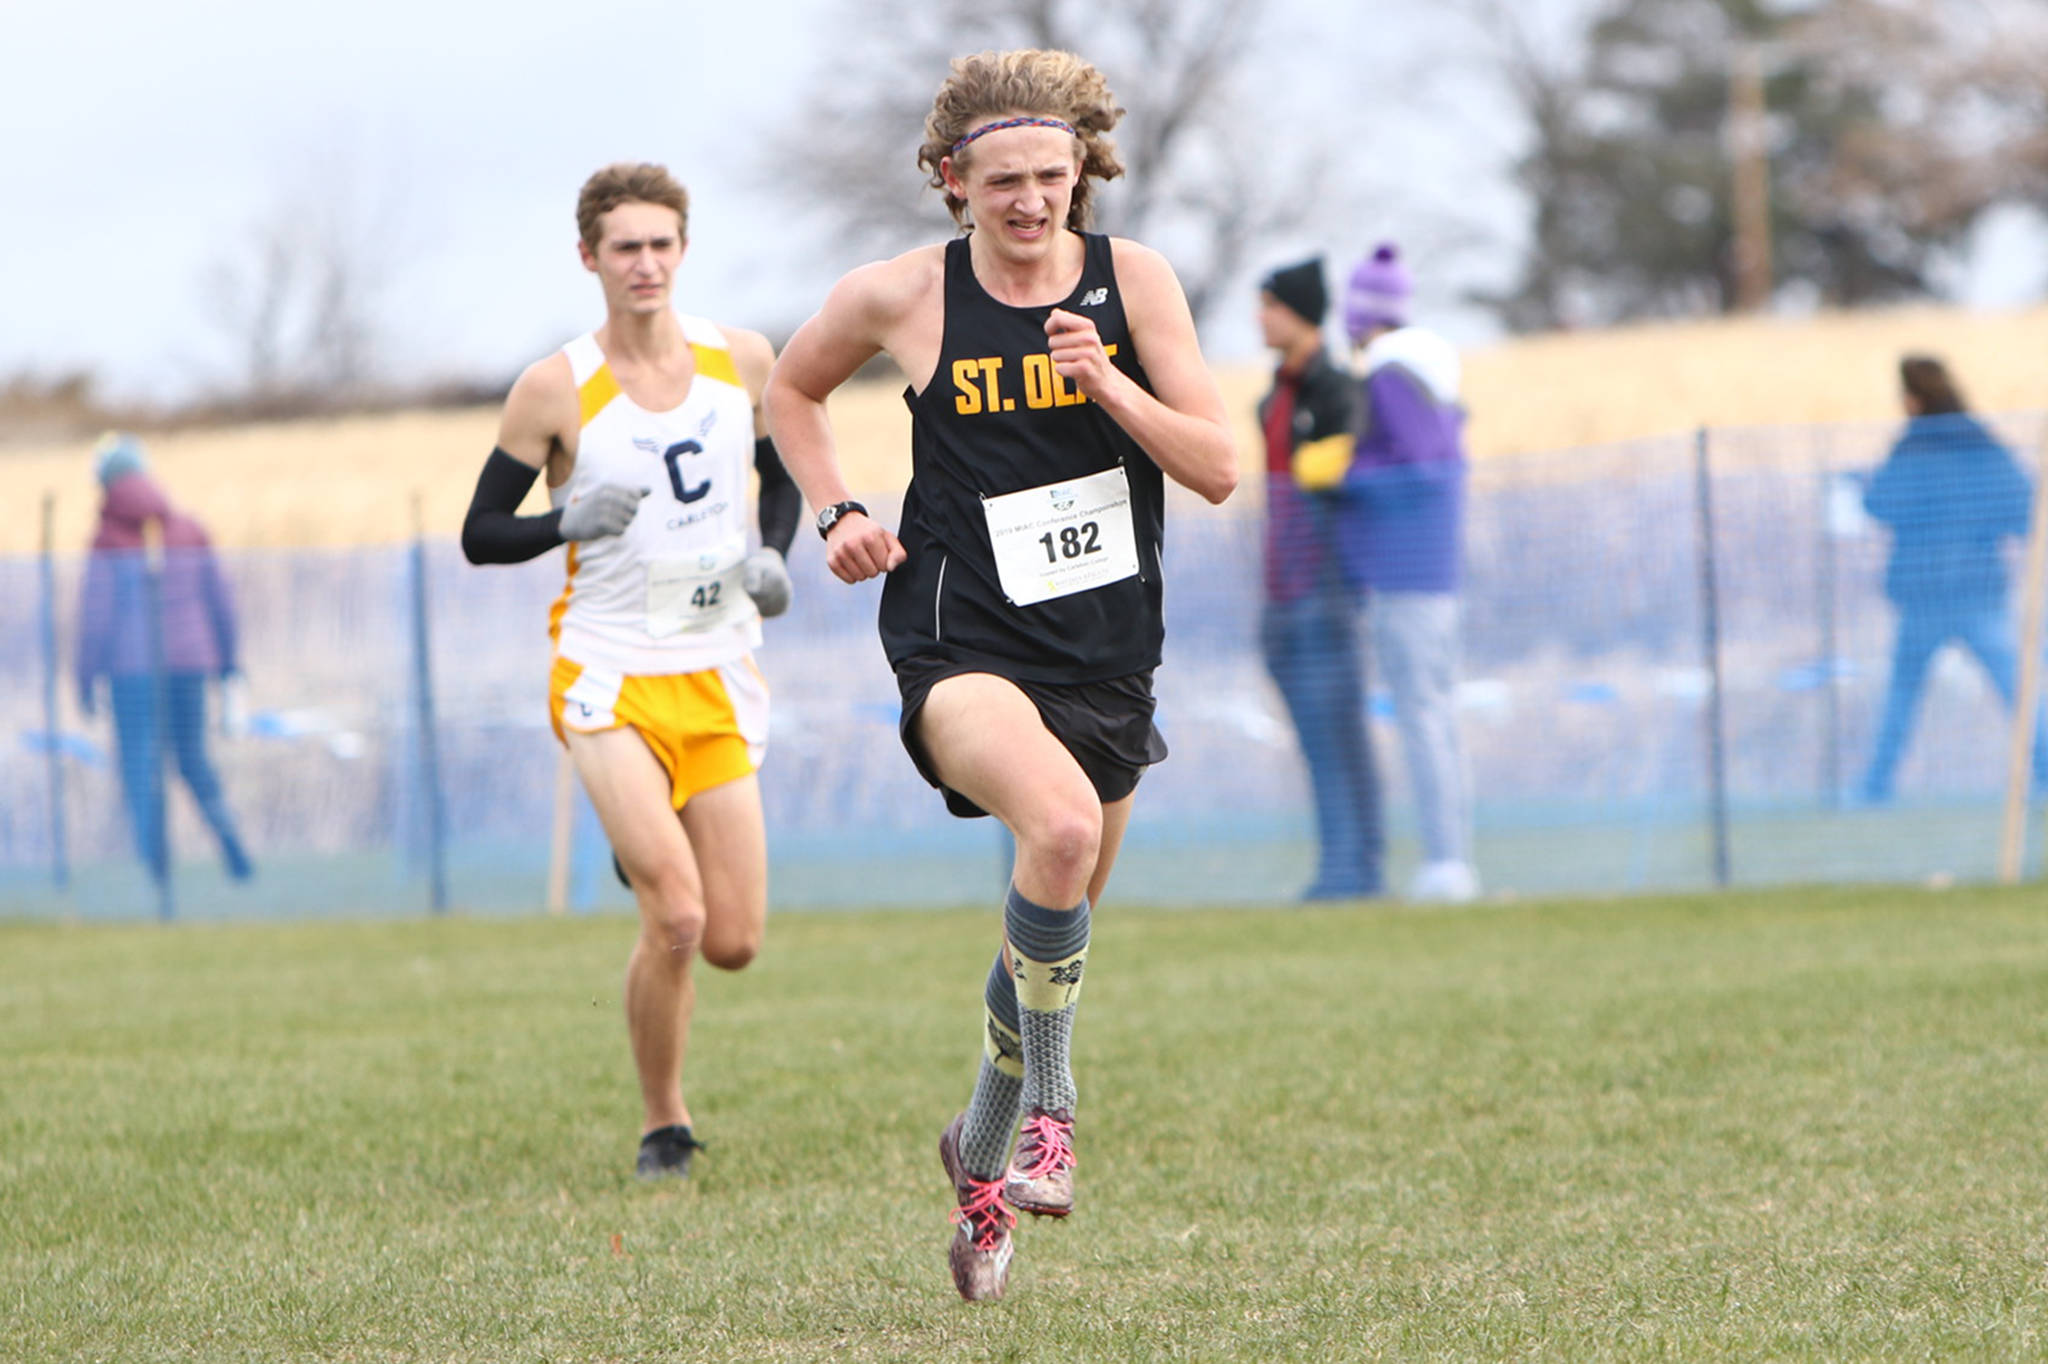 St. Olaf College freshman Arne Ellefson-Carnes competes in the Minnesota Intercollegiate Athletic Conference championship meet at Carleton College in Northfield, Minnestoa, on Saturday, Nov. 2, 2019. Ellefson-Carnes, a 2019 Juneau-Douglas High School: Yadaat.at Kale graduate, ran in the NCAA Division III National Championships on Saturday, placing 159th out of 280 runners. (Courtesy Photo | St. Olaf College)